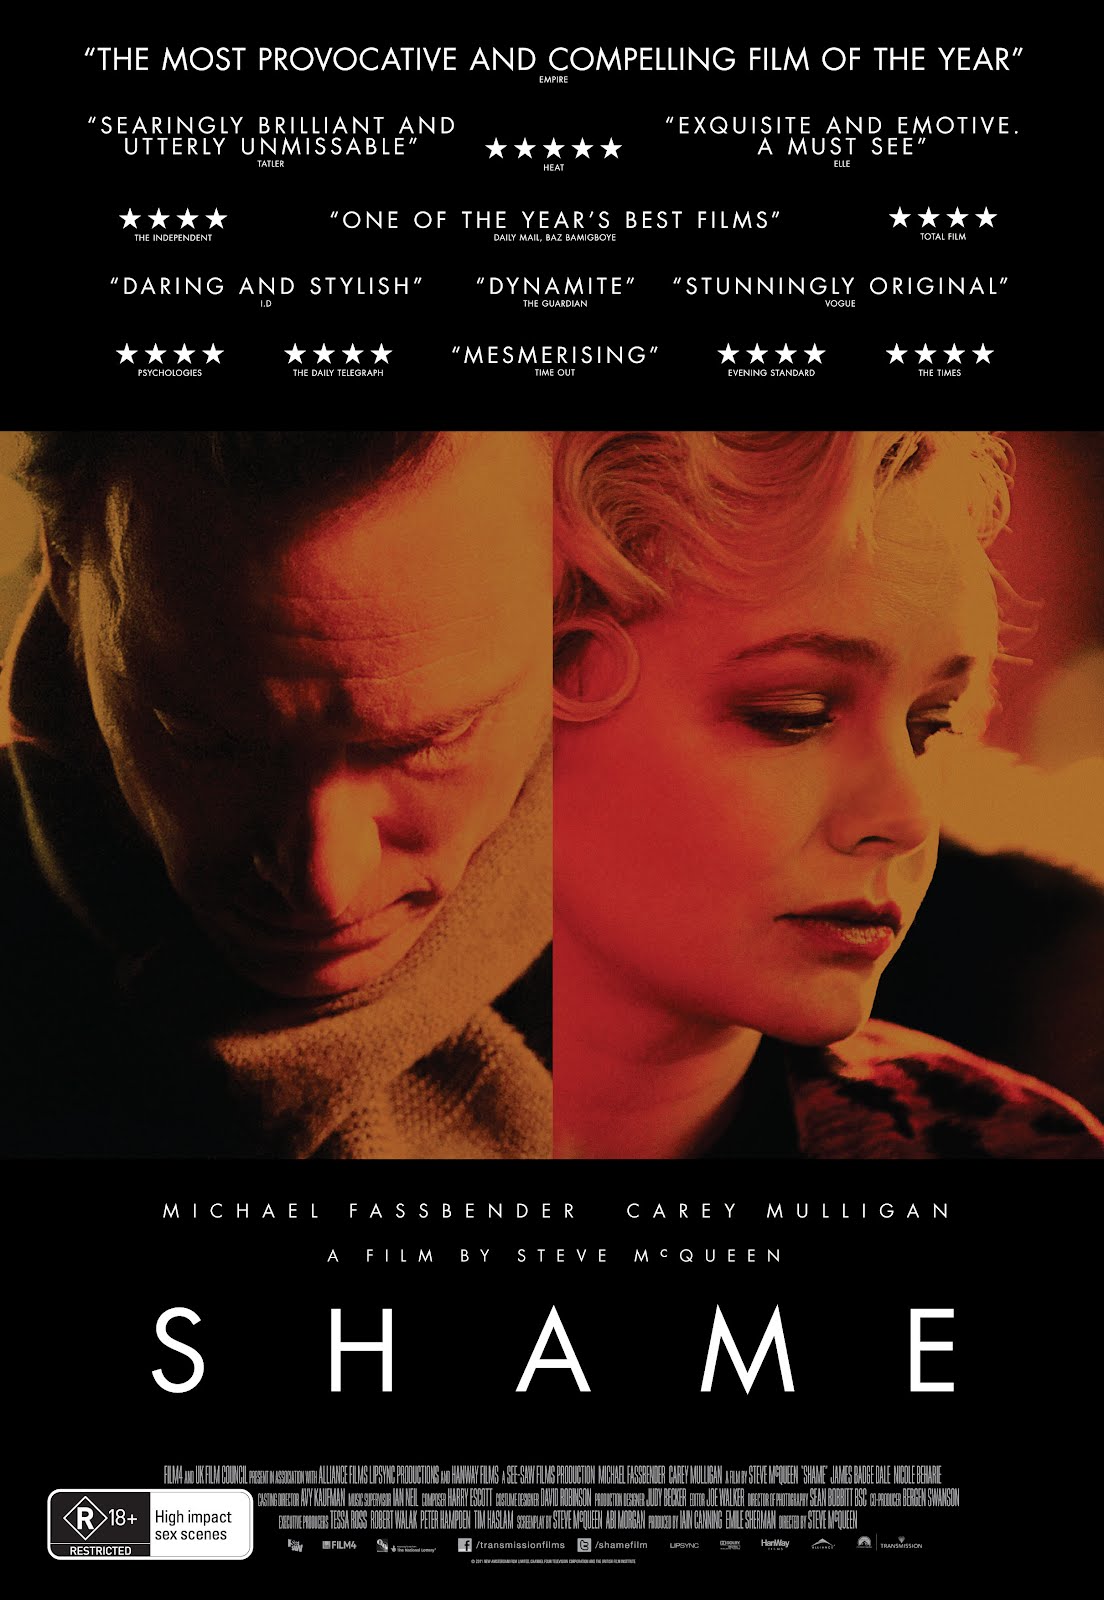 britt ray recommends shame movie watch online pic